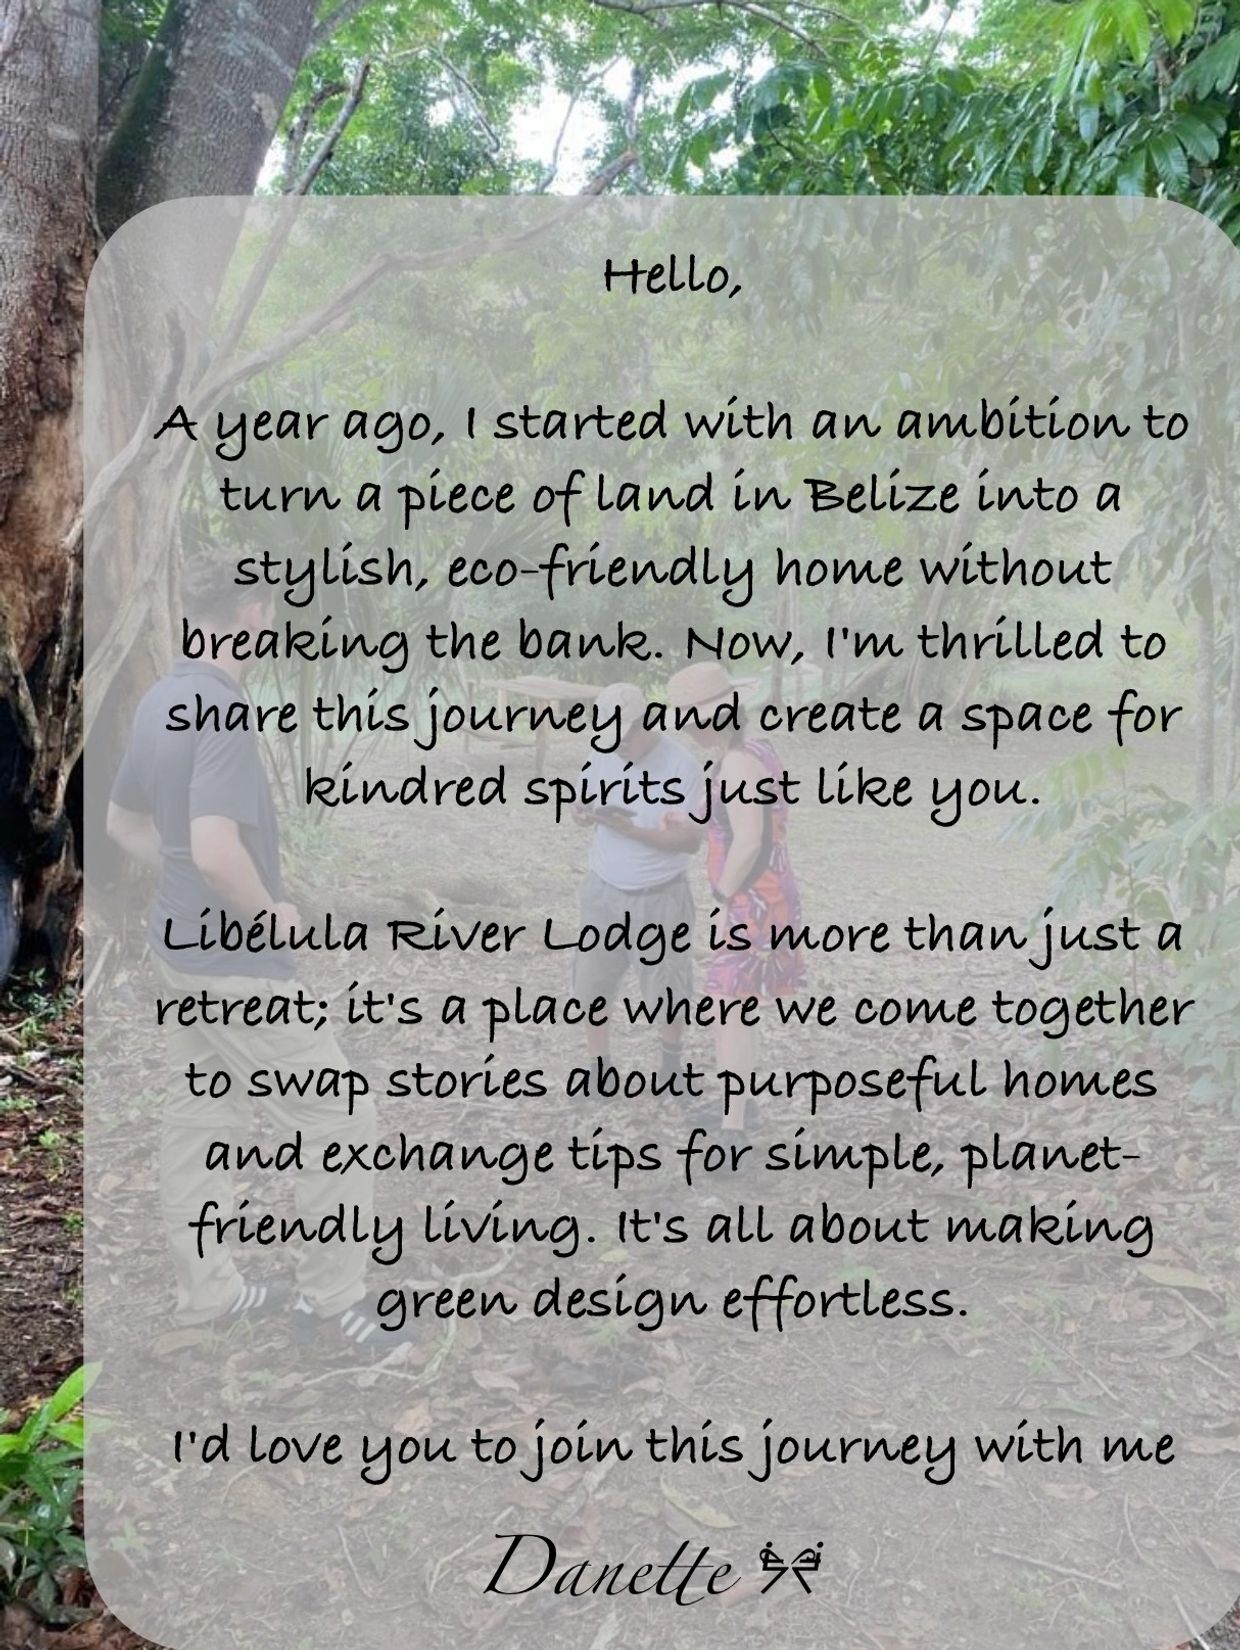 A welcome letter to guests of Libelula River Lodge to encourage them to join the journey of build